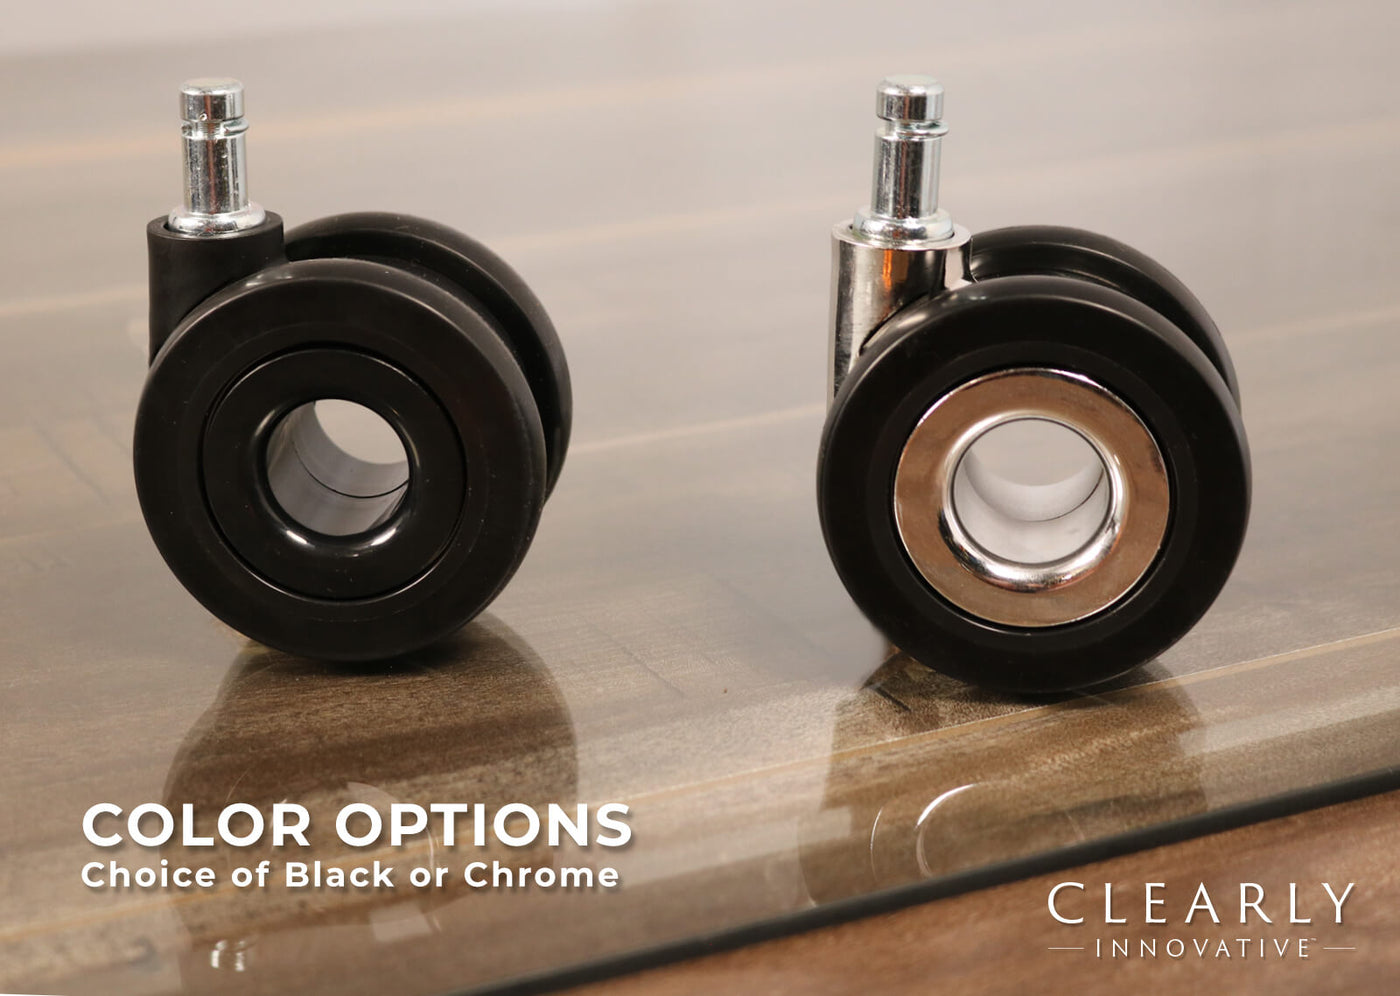 Stealth Desk Chair Casters come in Black or Chrome